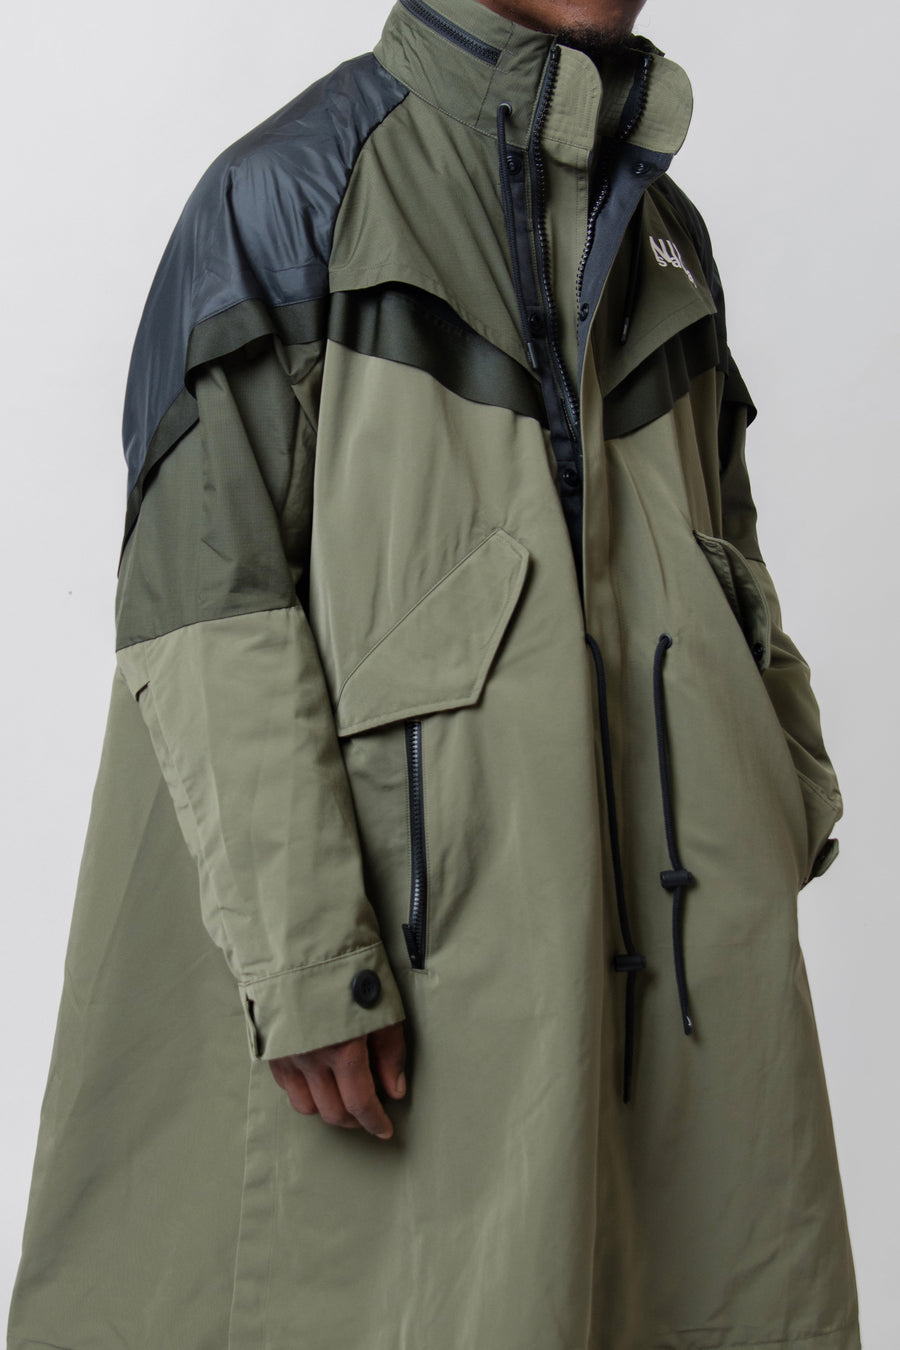 Sacai SG Trench Jacket Medium Olive DQ9027-222 (LAUNCH PRODUCT)